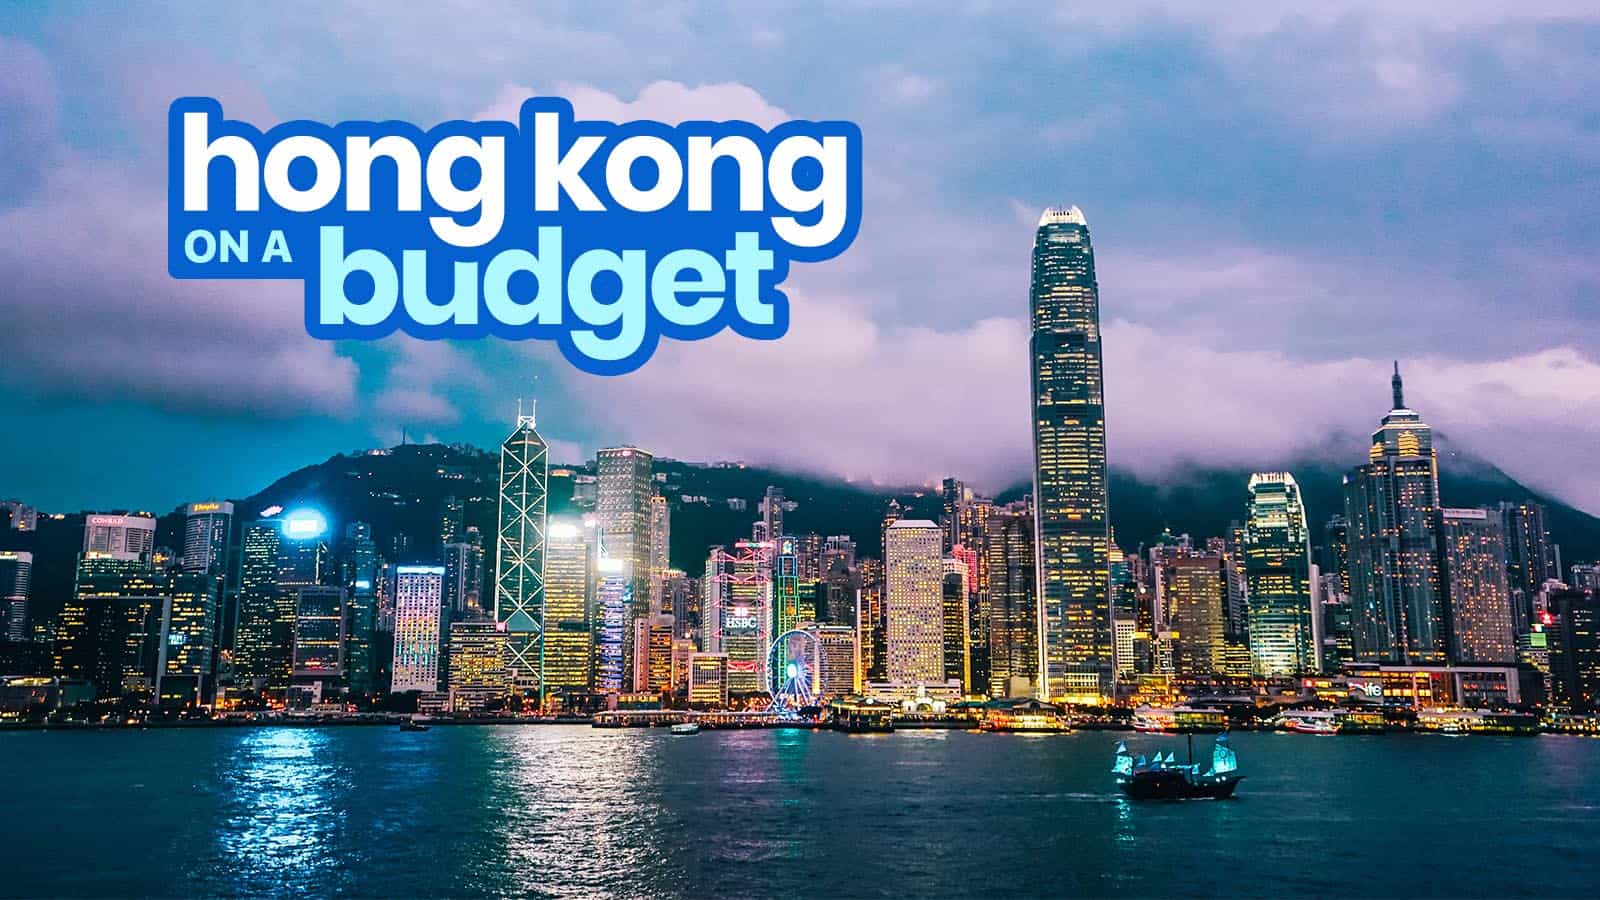 HONG KONG TRAVEL GUIDE with Budget Itinerary The Poor Traveler